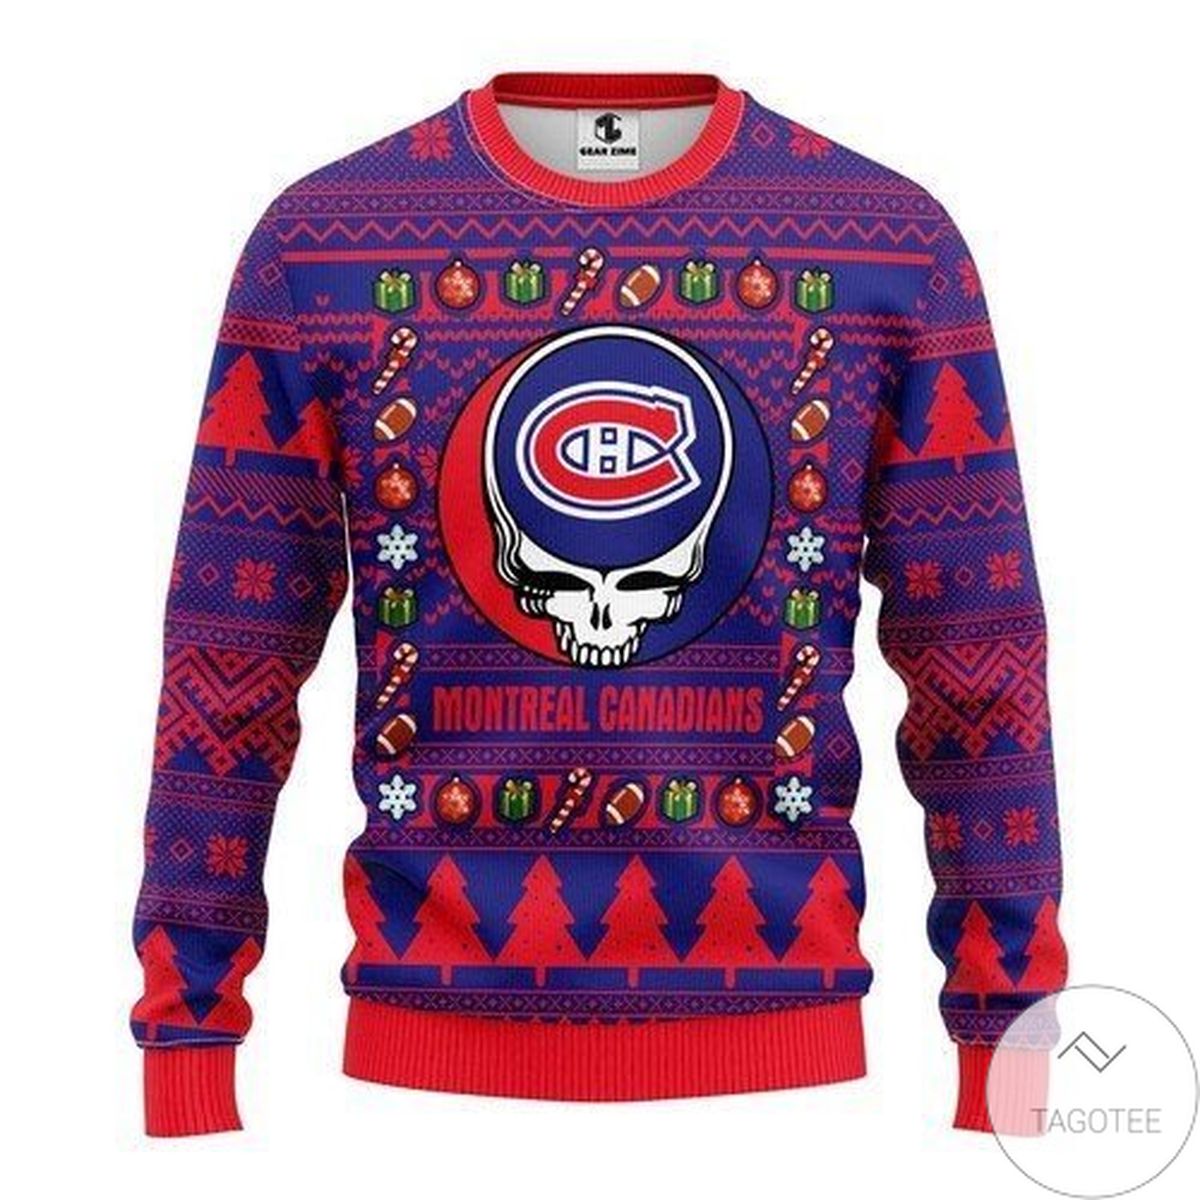 Nhl Montreal Canadiens Grateful Dead Ugly Christmas Sweater